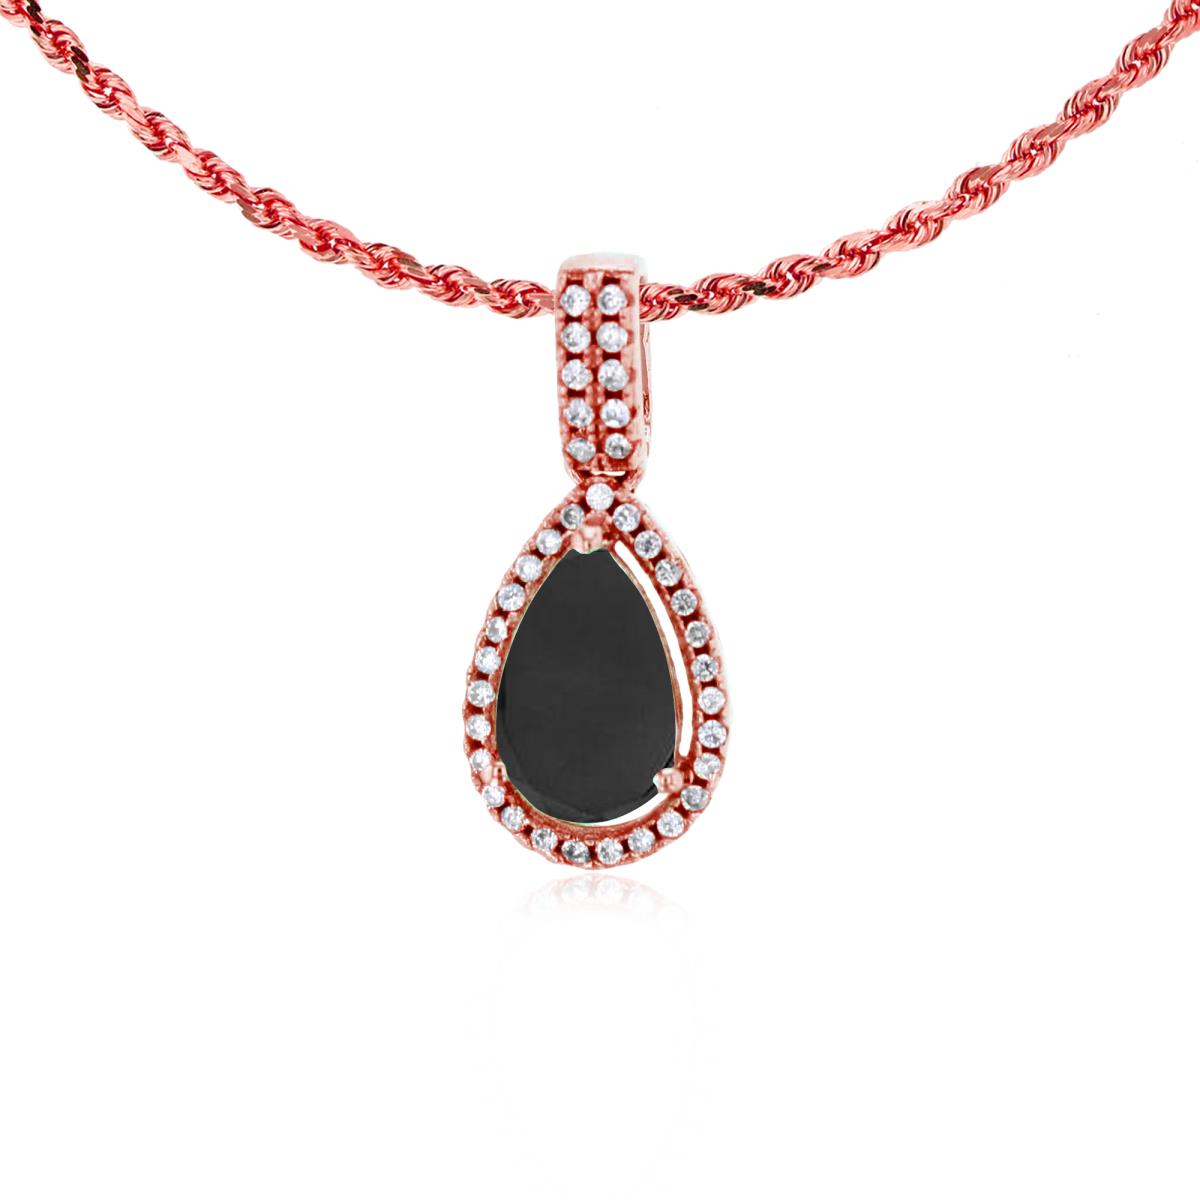 10K Rose Gold 8x5mm Pear Cut Onyx & 0.11 CTTW Diamond Halo 18" Rope Chain Necklace